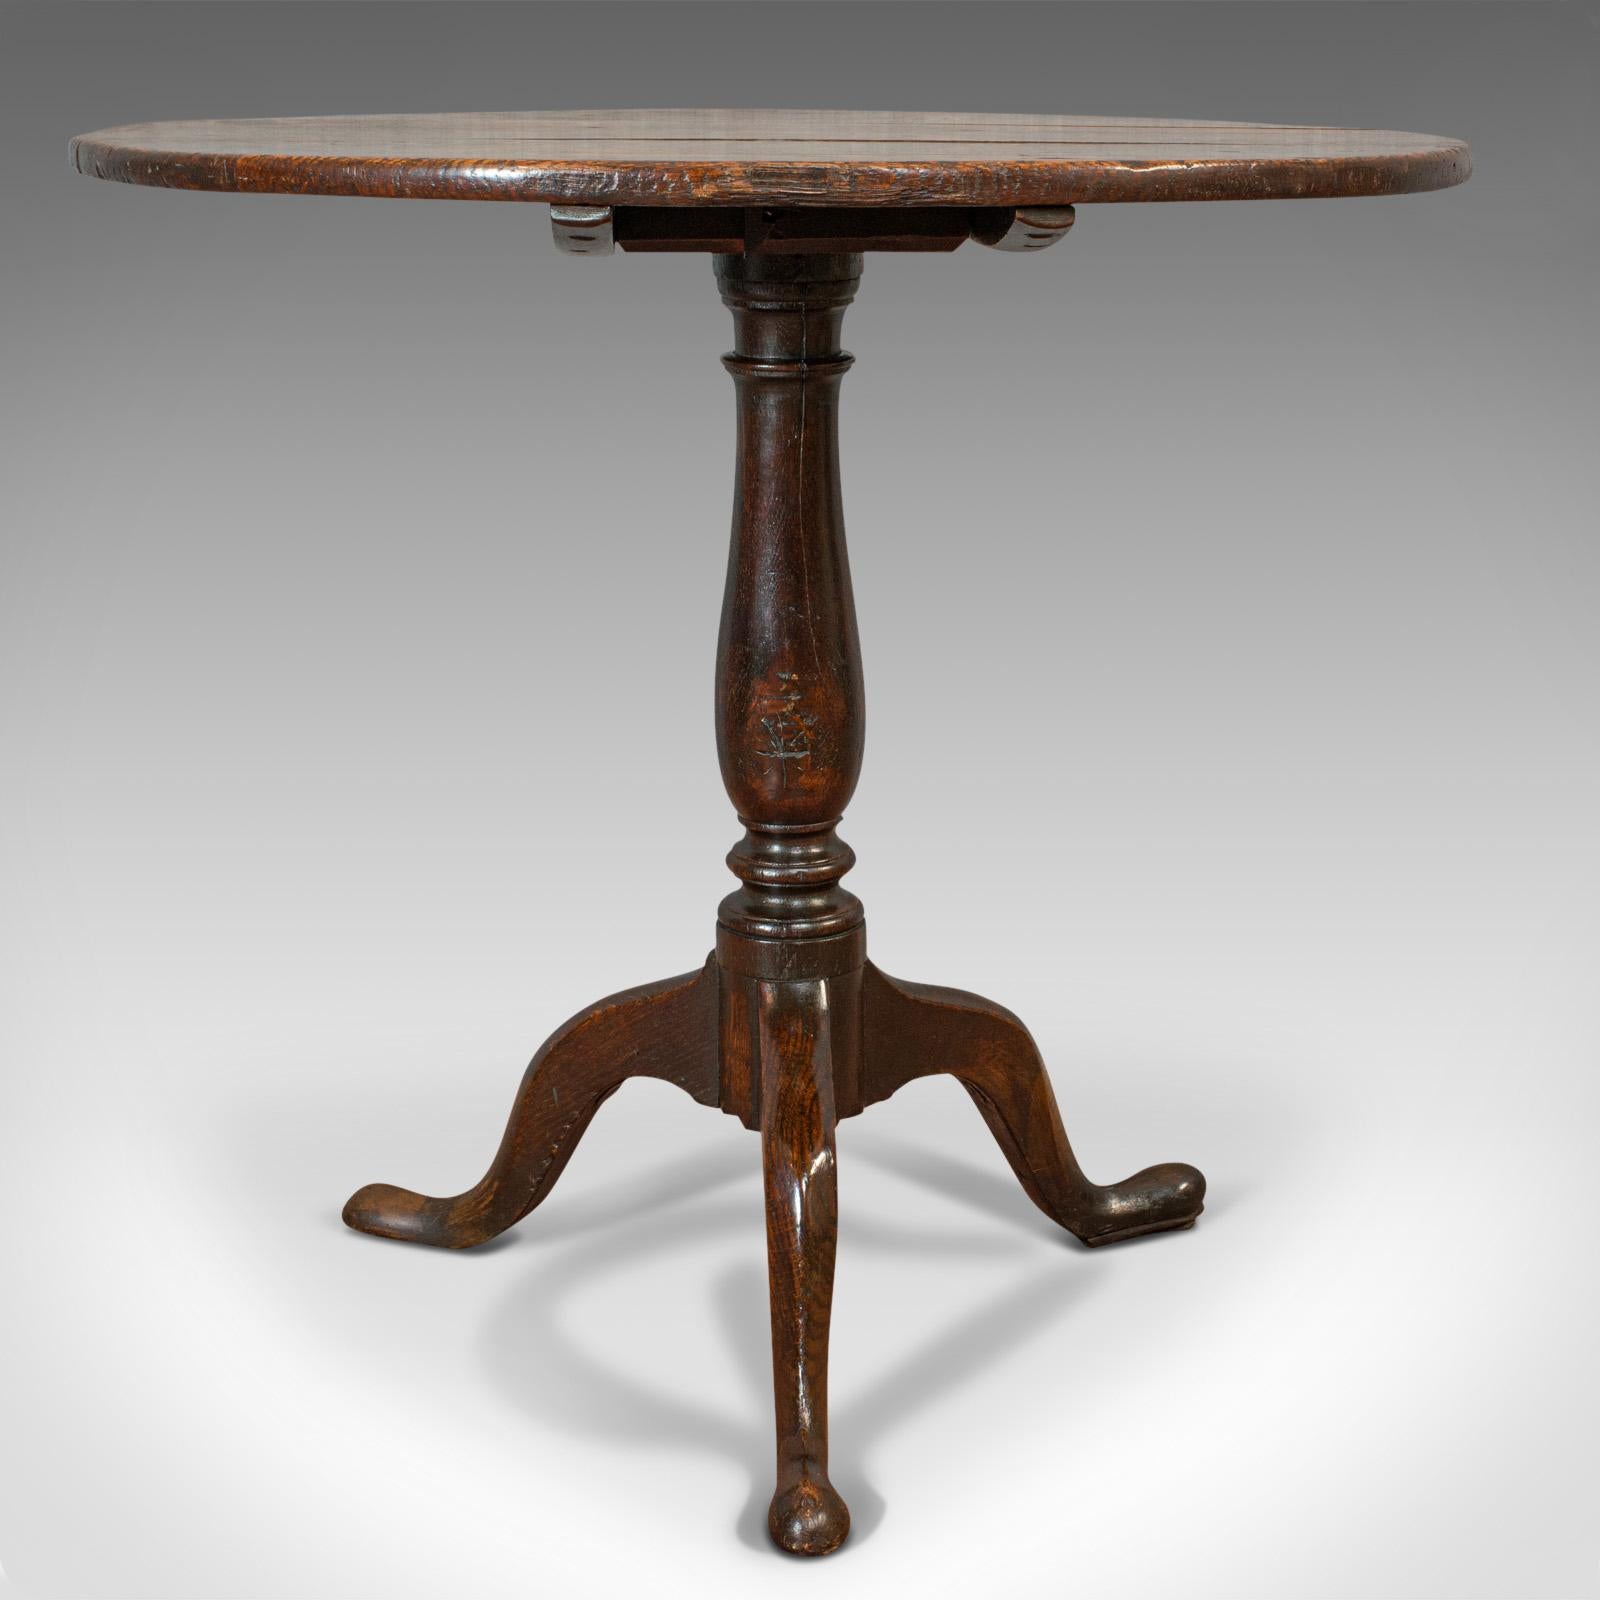 This is an antique circular table. An English, oak folding side or occasional table, dating to the Georgian period, circa 1780.

Superb patination to this Georgian piece
Displays a desirable aged patina
Select oak with fine grain interest and